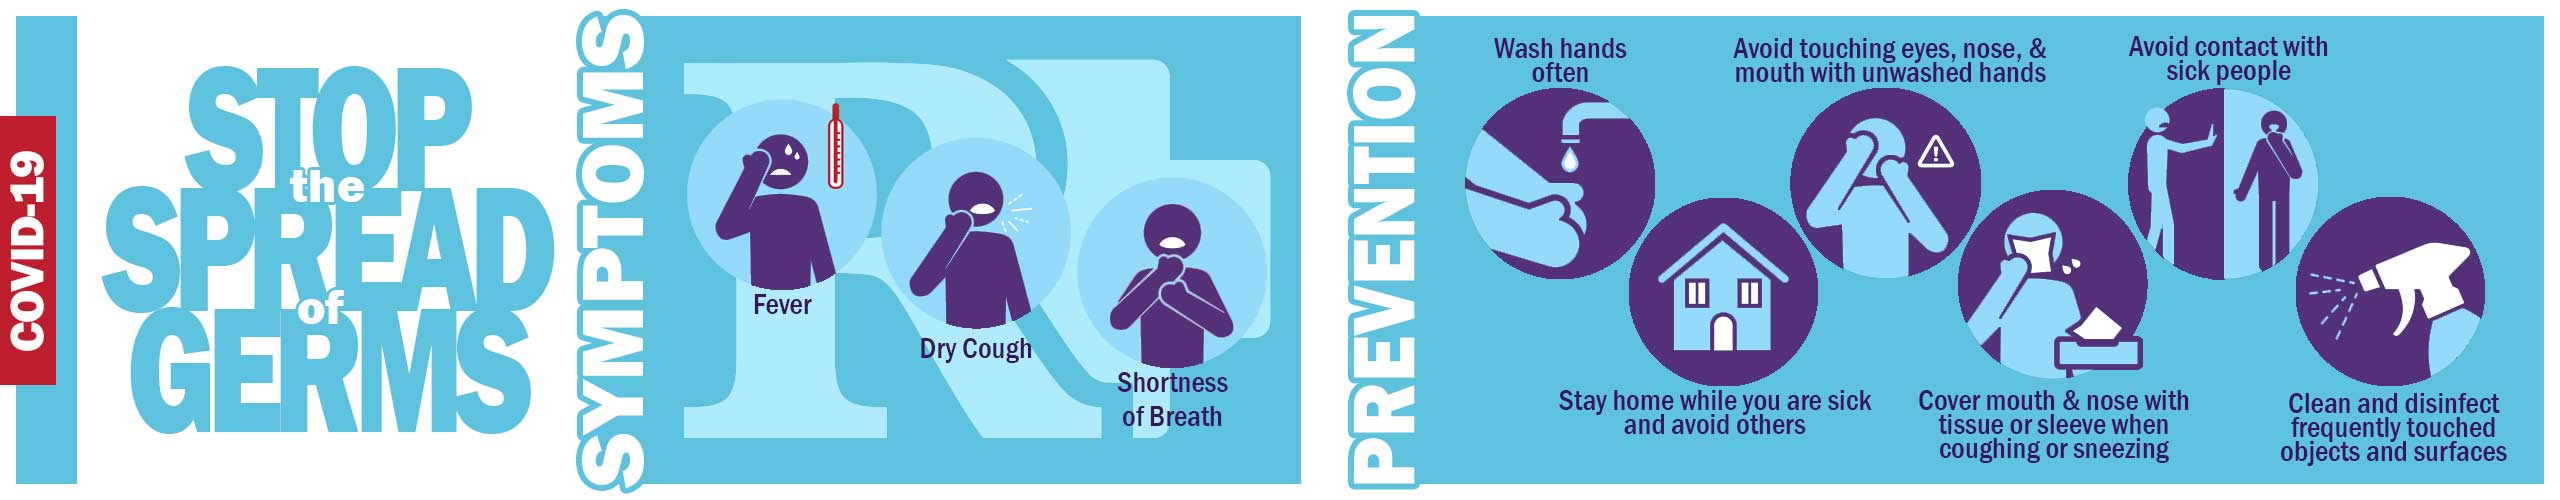 Banner picture of icon figures of symptoms and prevention, Banner says: STOP THE SPREAD OF GERMS

SYMPTOMS
-Fever
-Dry Cough
-Shortness of Breath

PREVENTION
-Wash hands often
-Stay home while you are sick and avoid others
-Avoiding touching eyes, nose, & mouth with unwashed hands
-Cover mouth & nose with tissue or sleeve when coughing or sneezing
-Avoid contact with sick people
-Clean and disinfect frequently touched objects and surfaces